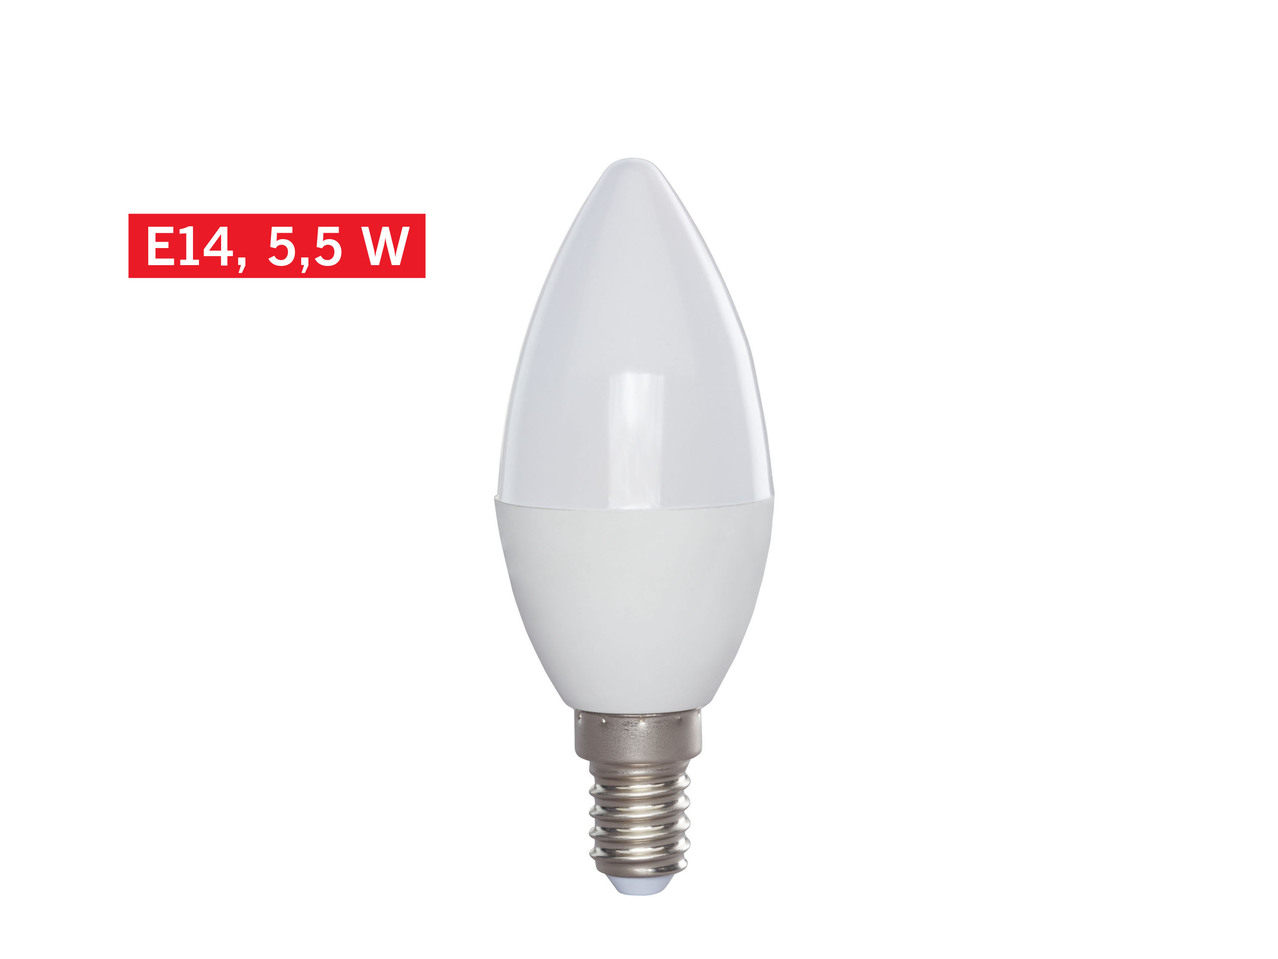 Dimmable LED Lamp, 5.5W-6.5W